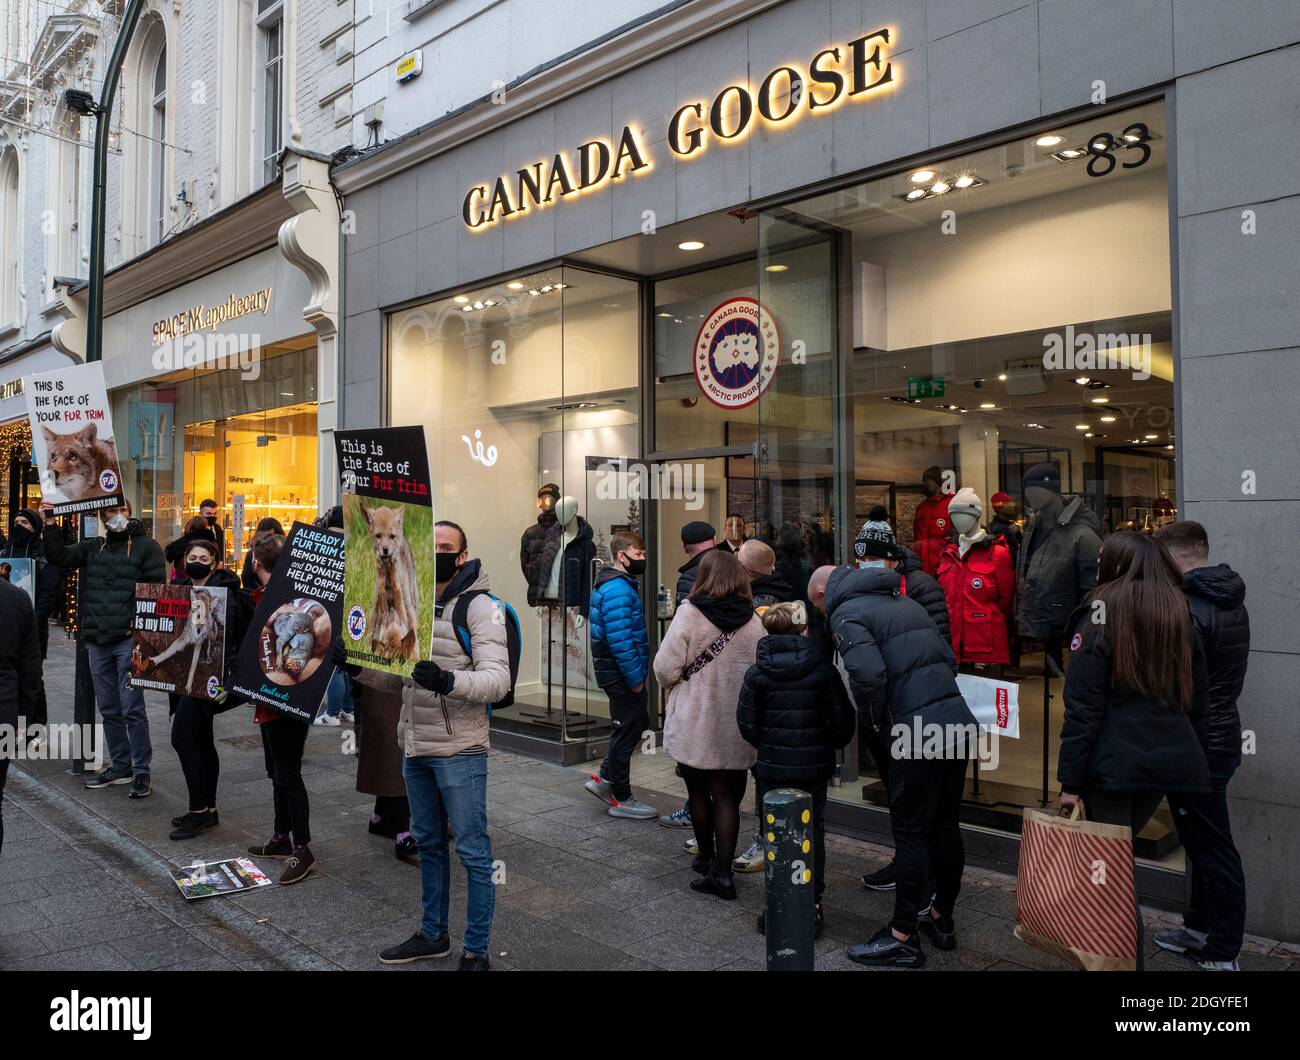 Canada Goose Store High Resolution Stock Photography and Images - Alamy